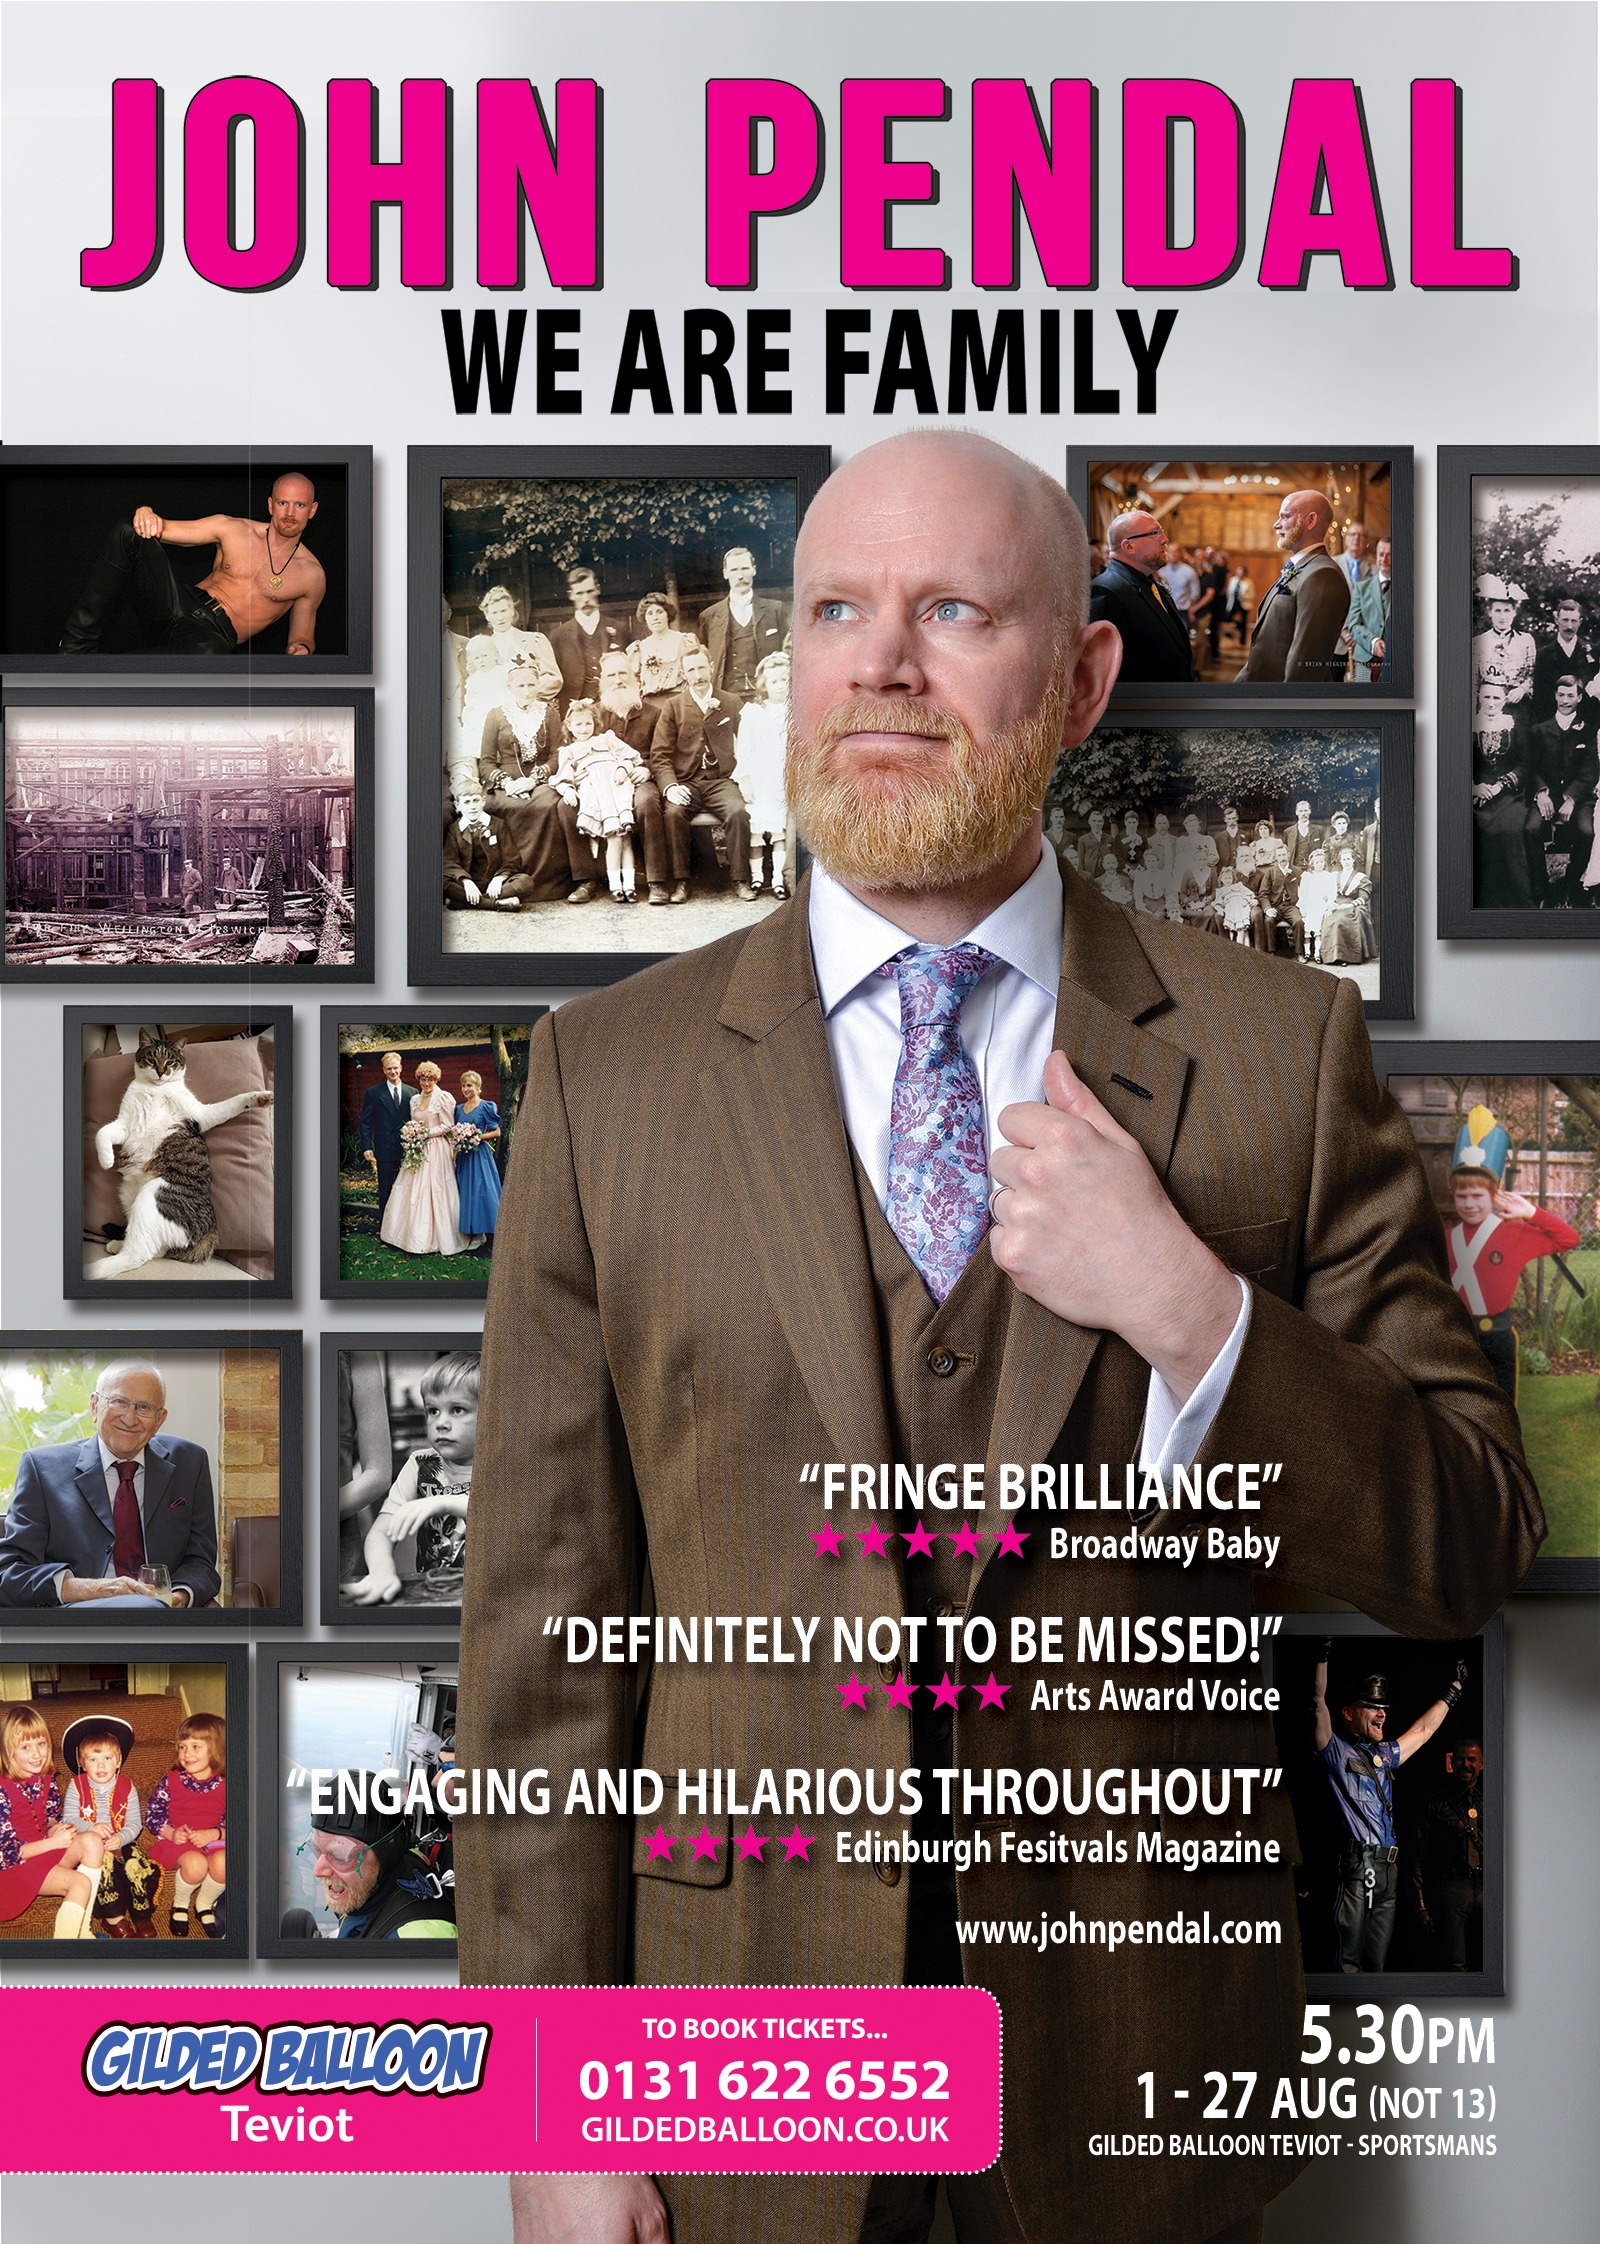 The poster for John Pendal: We Are Family